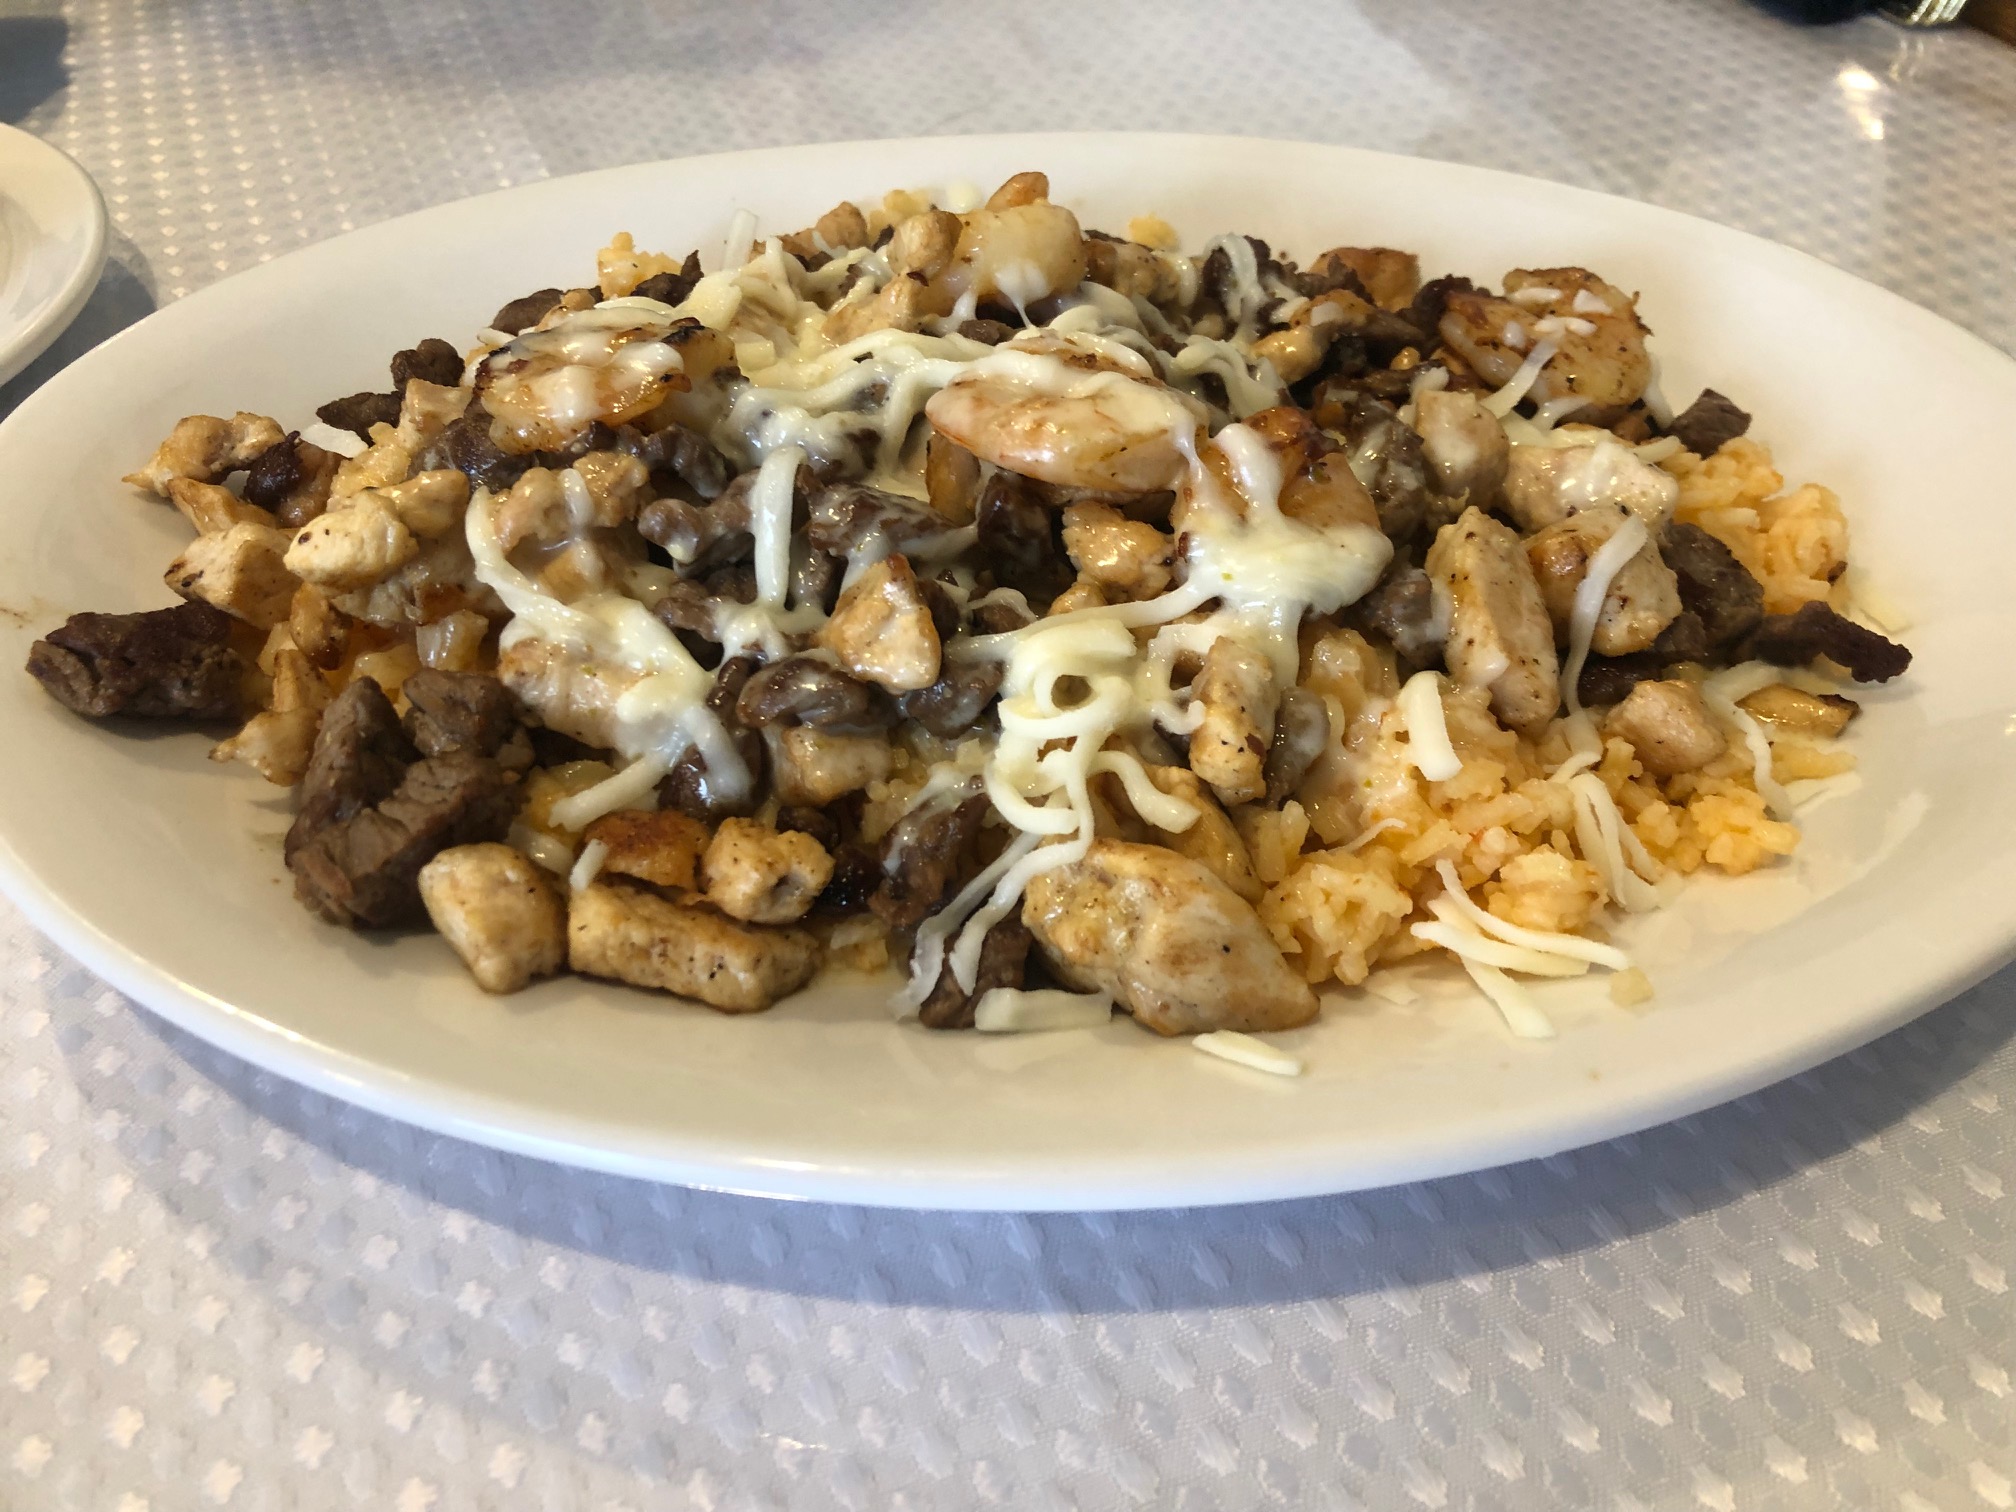 On a large white plate, there is a bed of rice covered in white cheese sauce with chicken, steak, and shrimp. Photo by Alyssa Buckley.